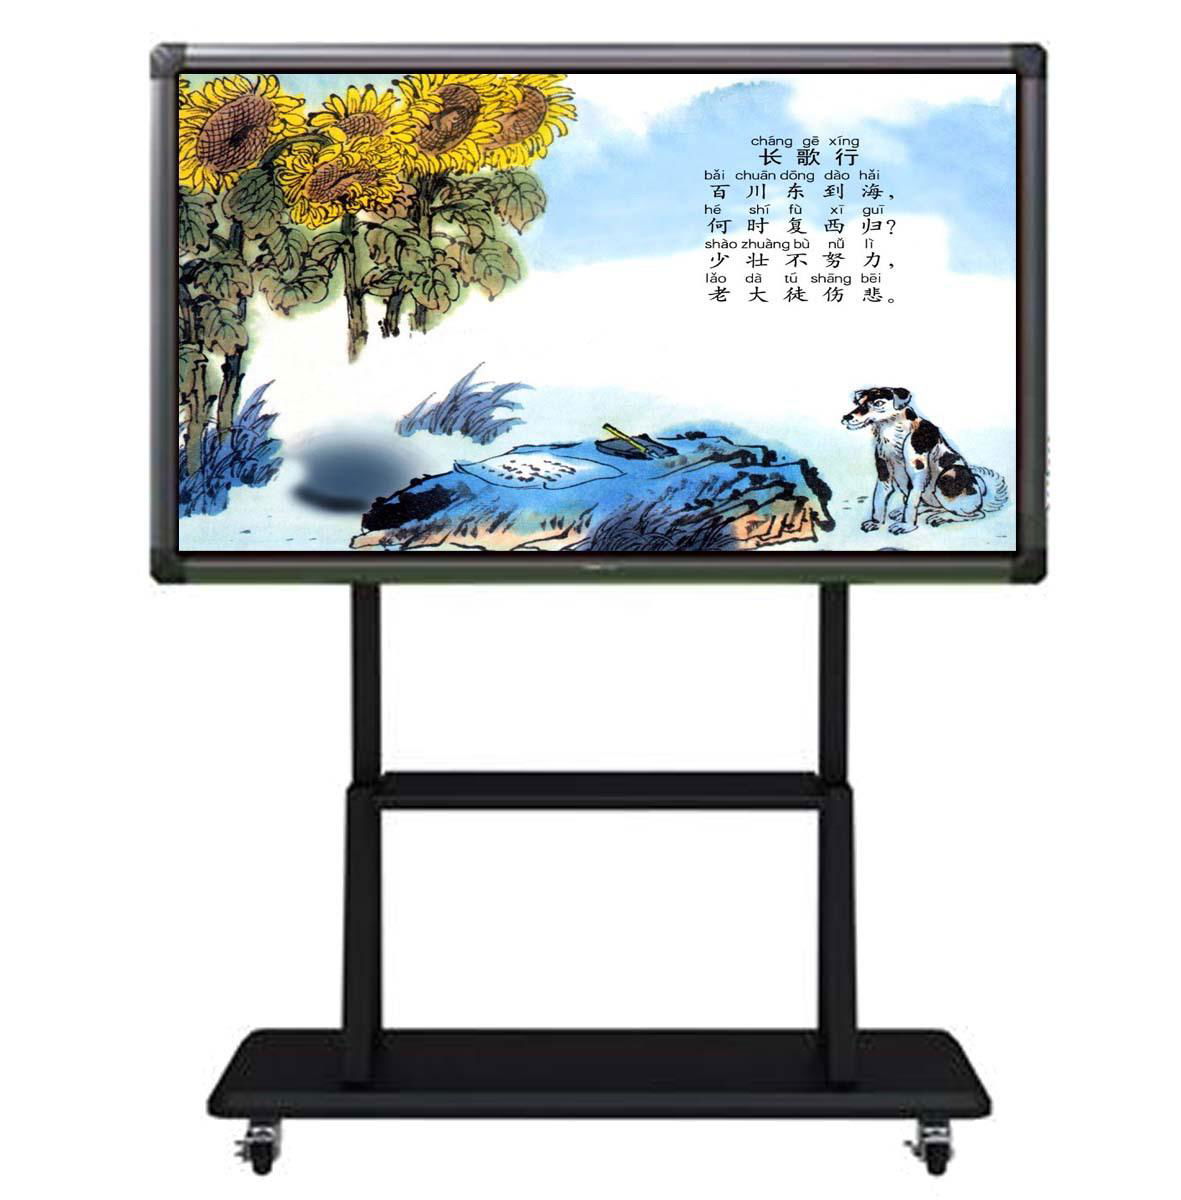  infrared touch screen LCD smart electronic interactive whiteboard digital for c 3